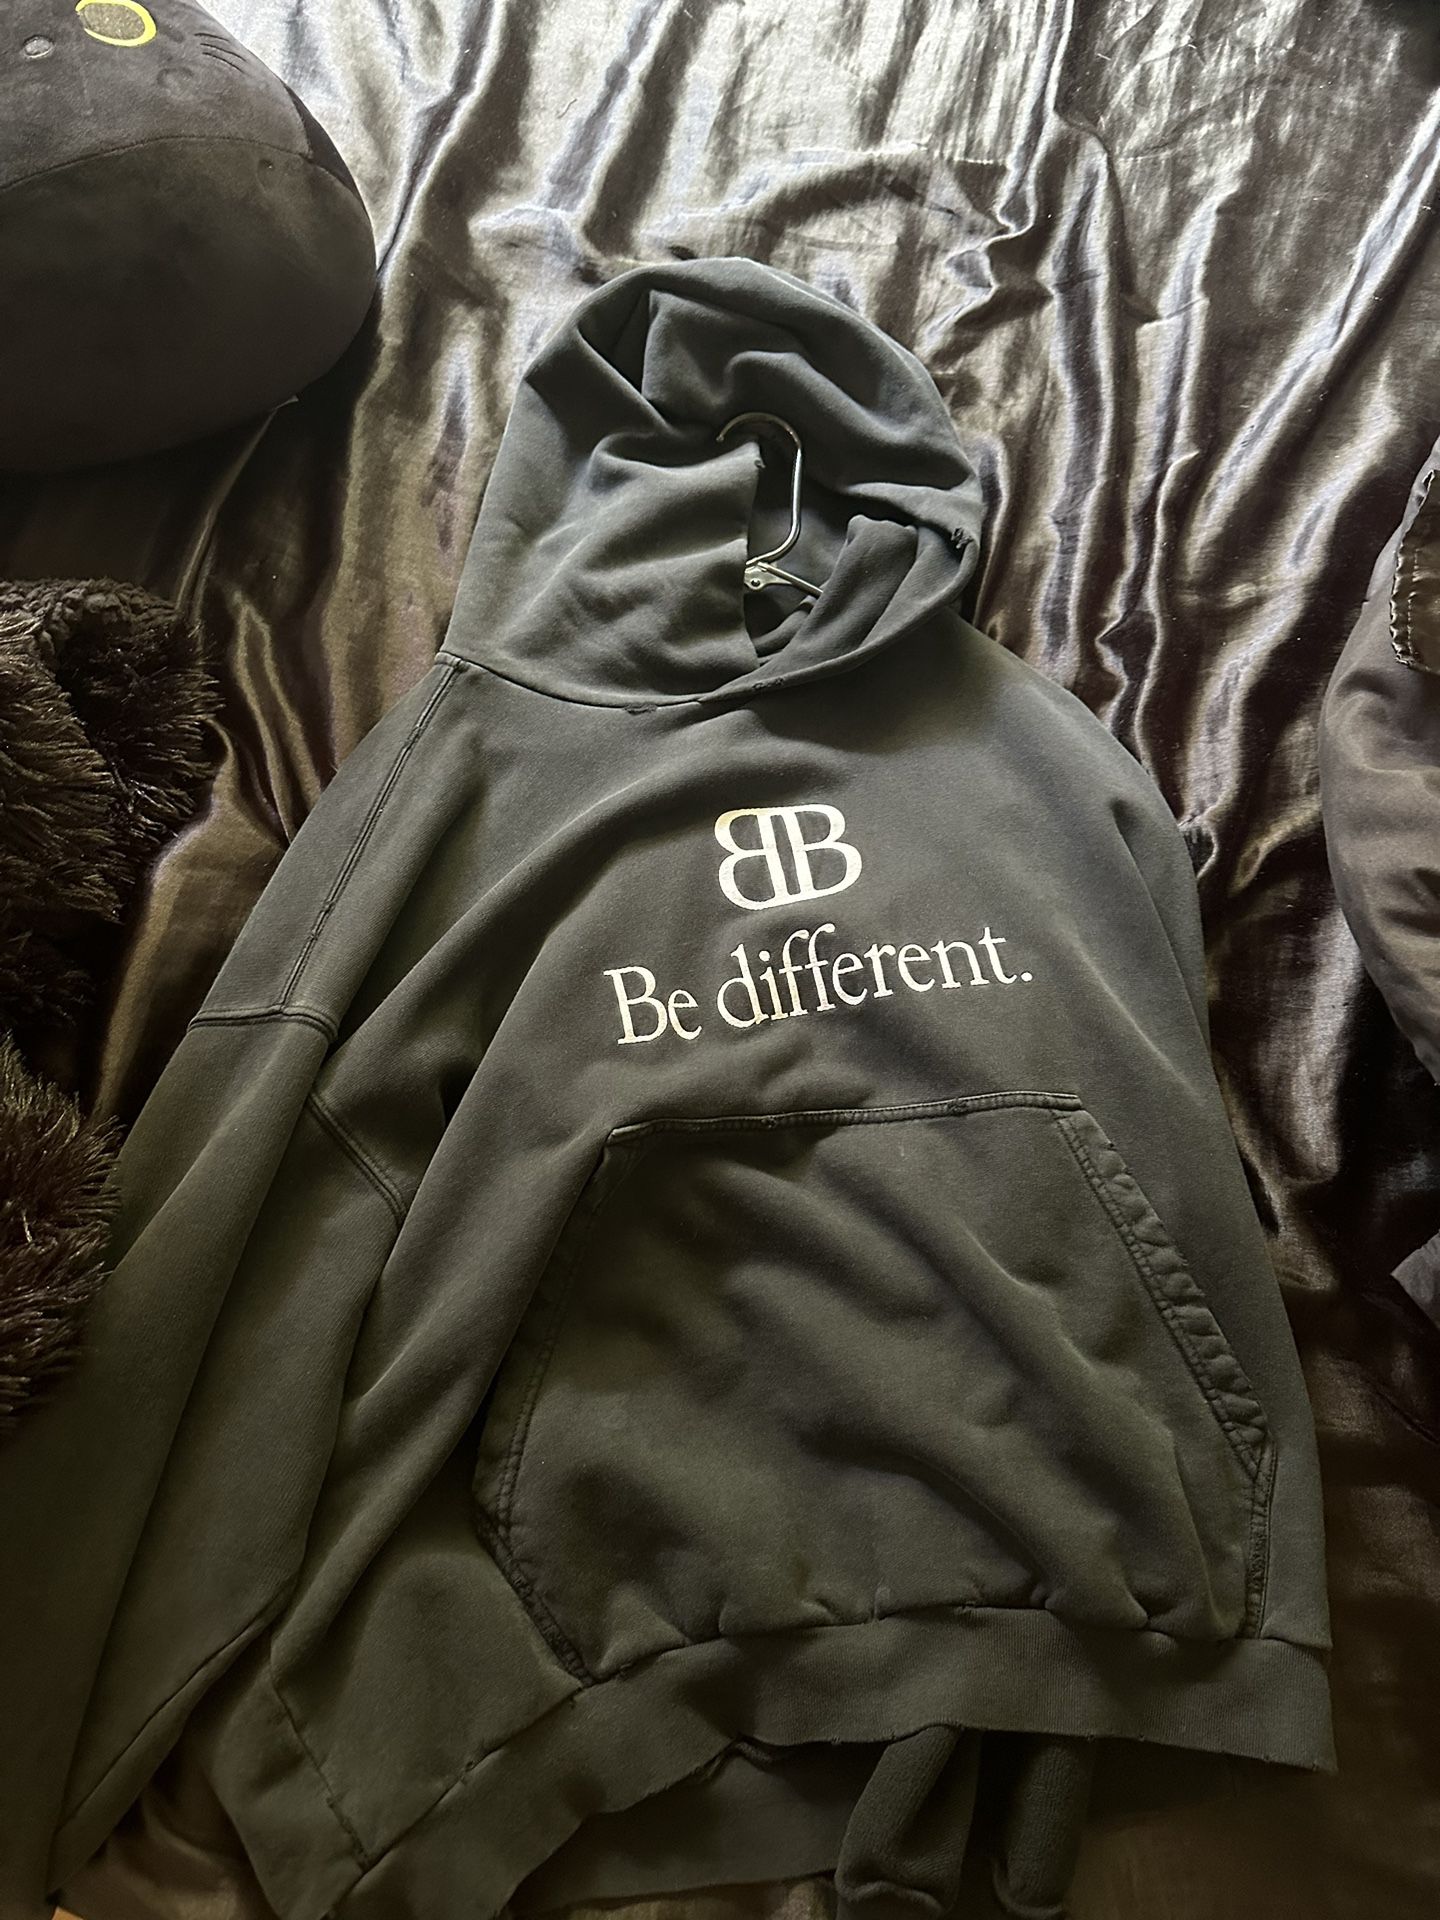 Balenciaga Be different hoodie for Sale in Monterey Park, CA - OfferUp